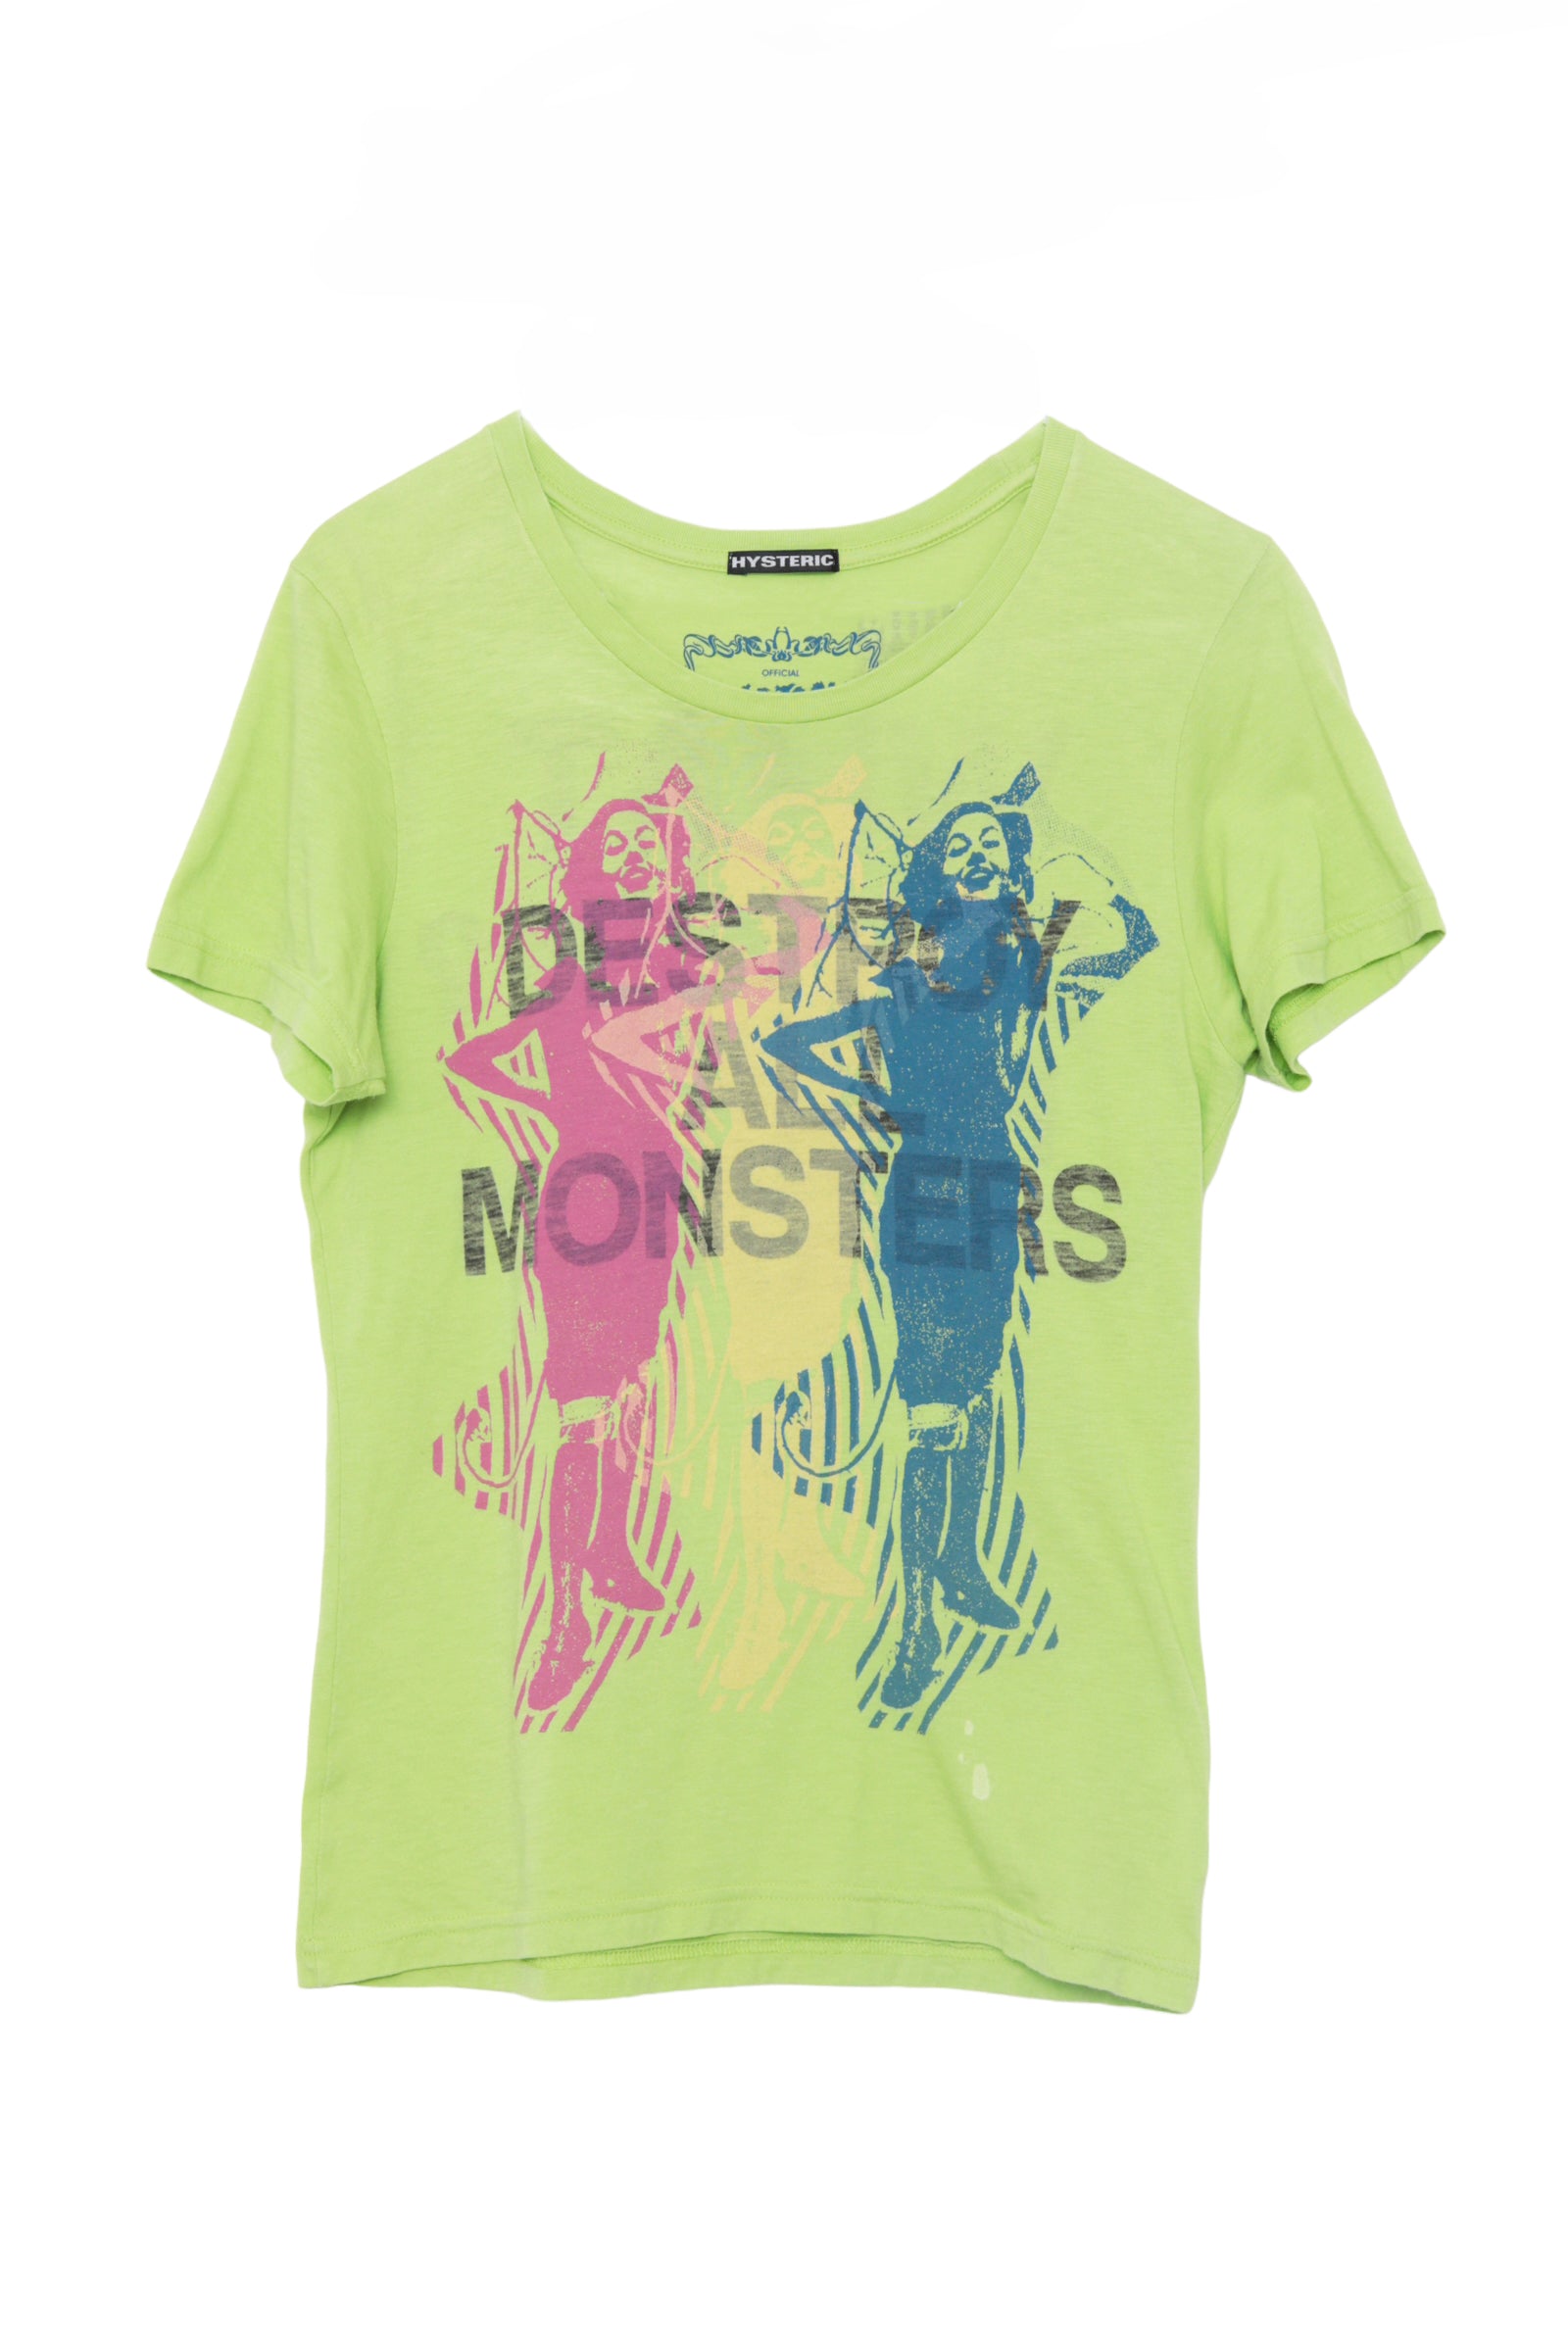 HYSTERIC GLAMOUR × DESTROY ALL MONSTERS GRAPHIC T-SHIRT